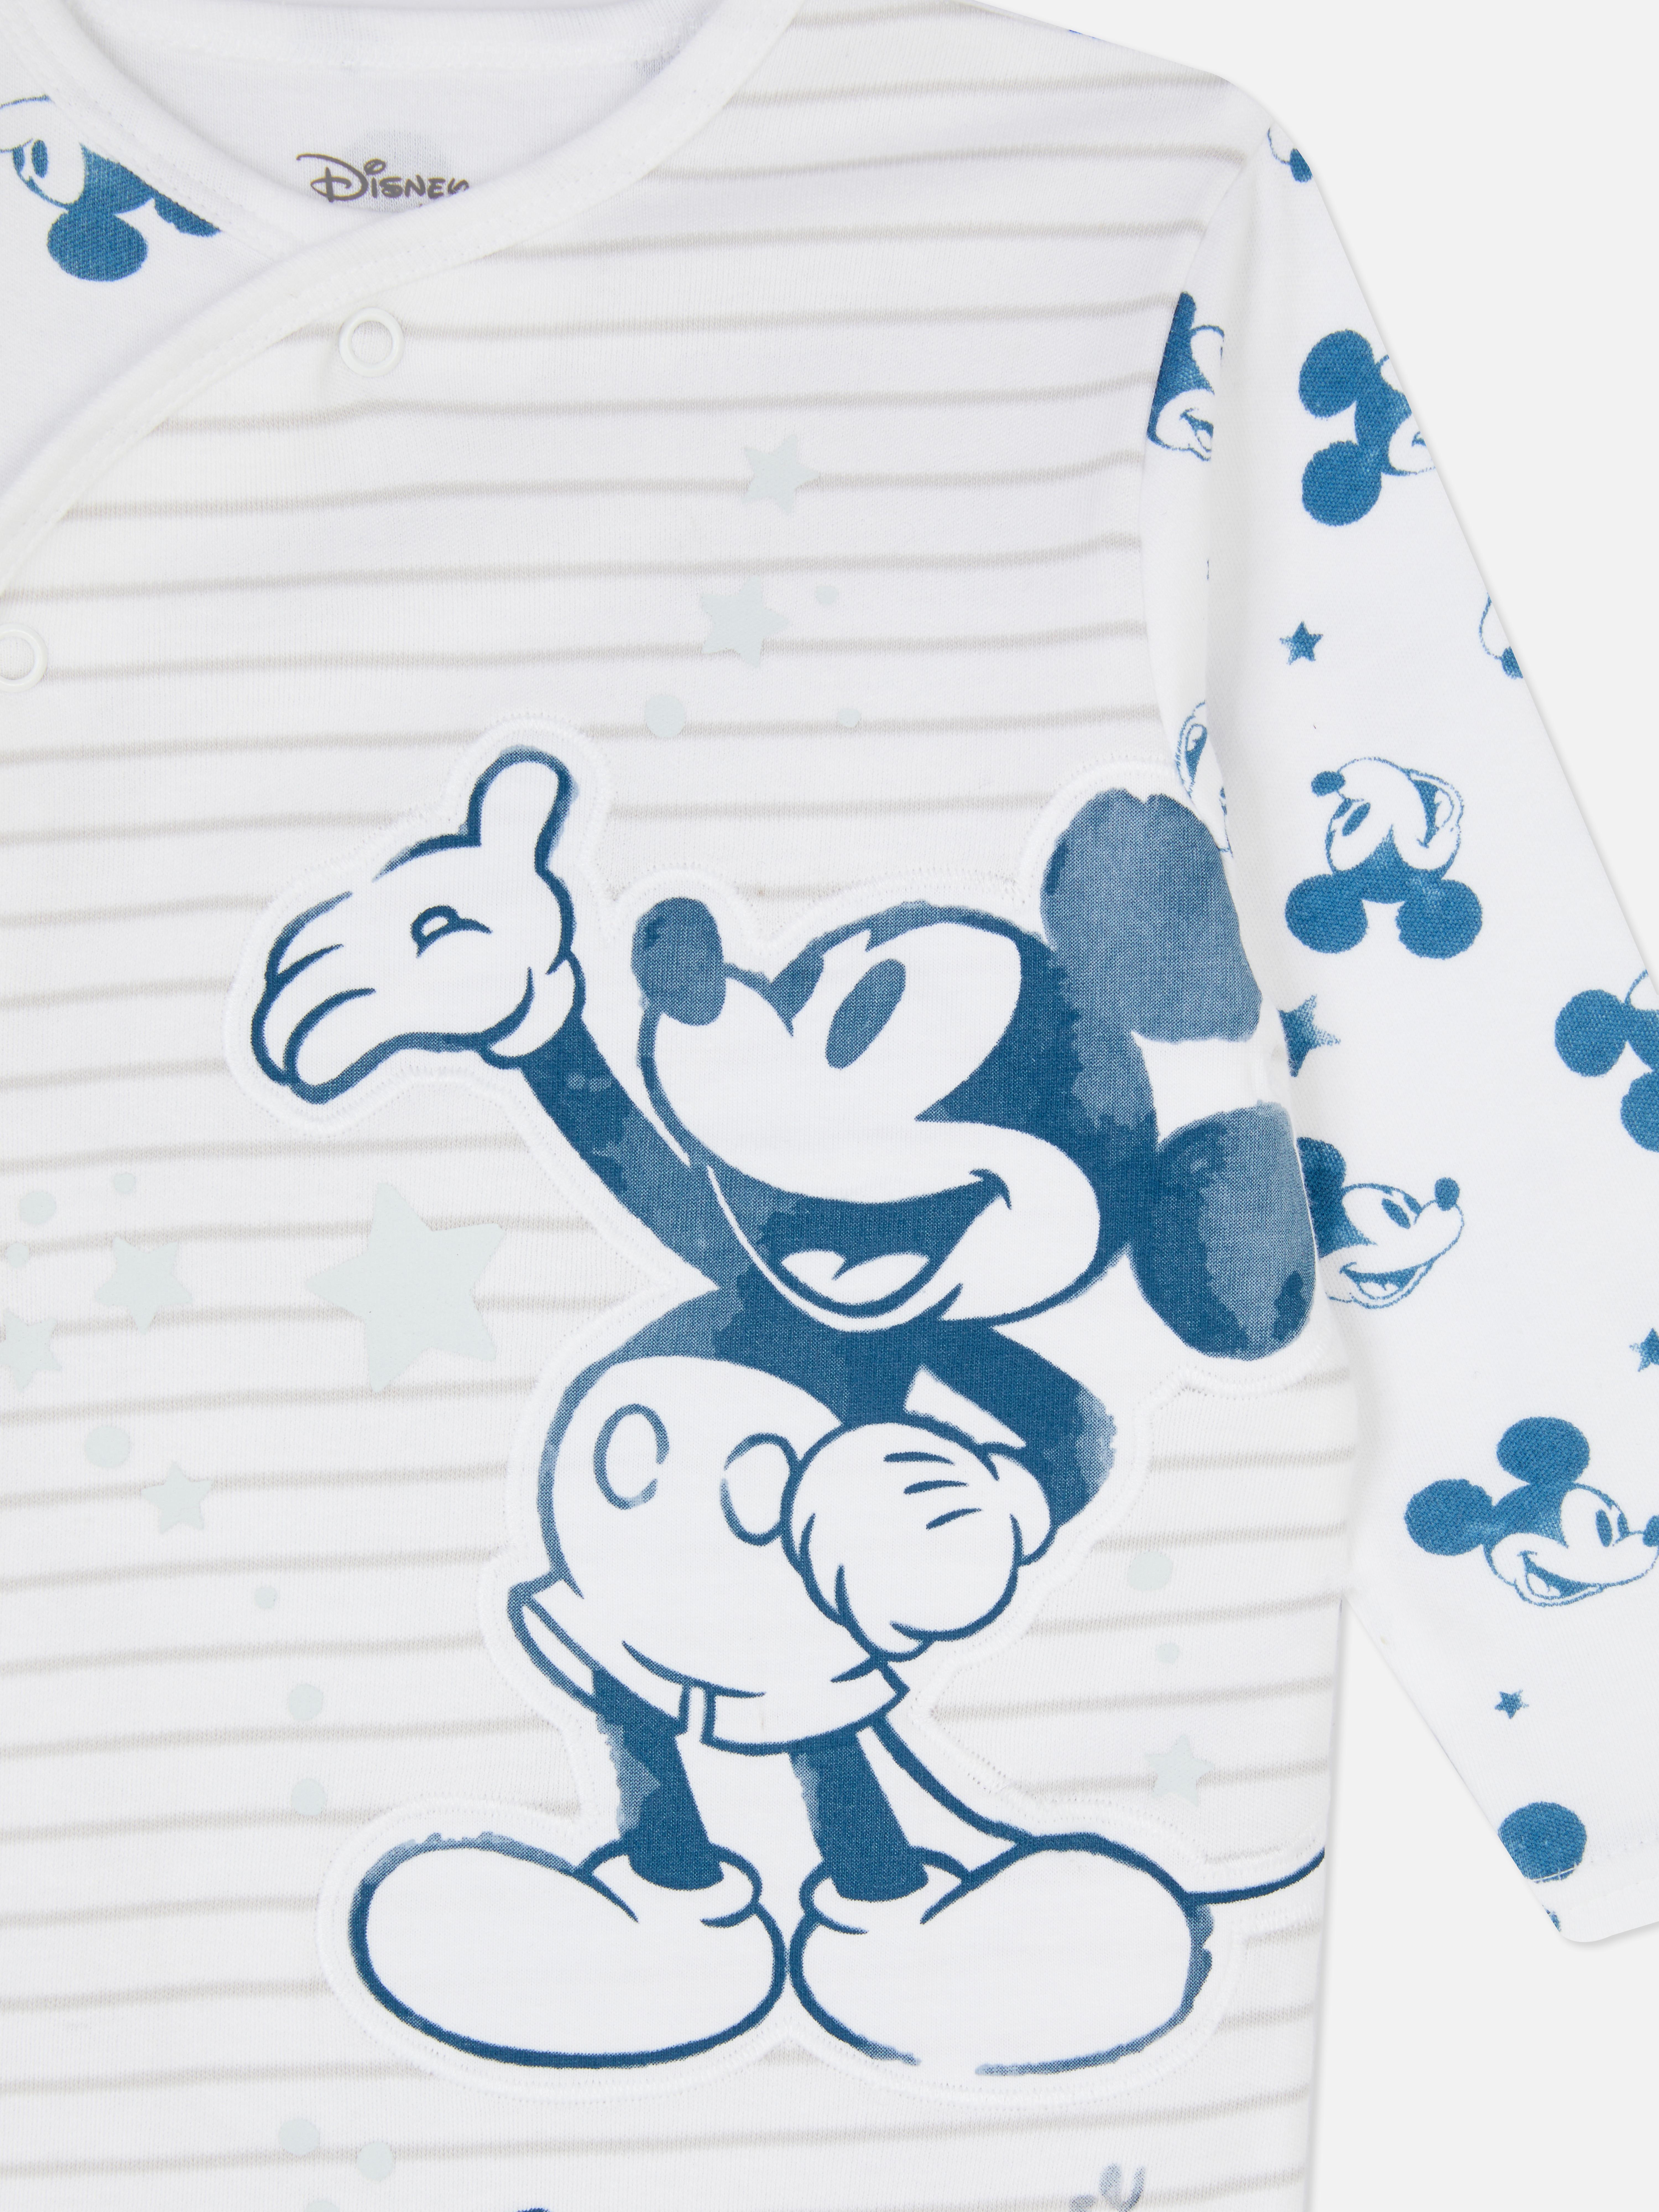 Disney's Mickey Mouse Babygrow and Accessories Set